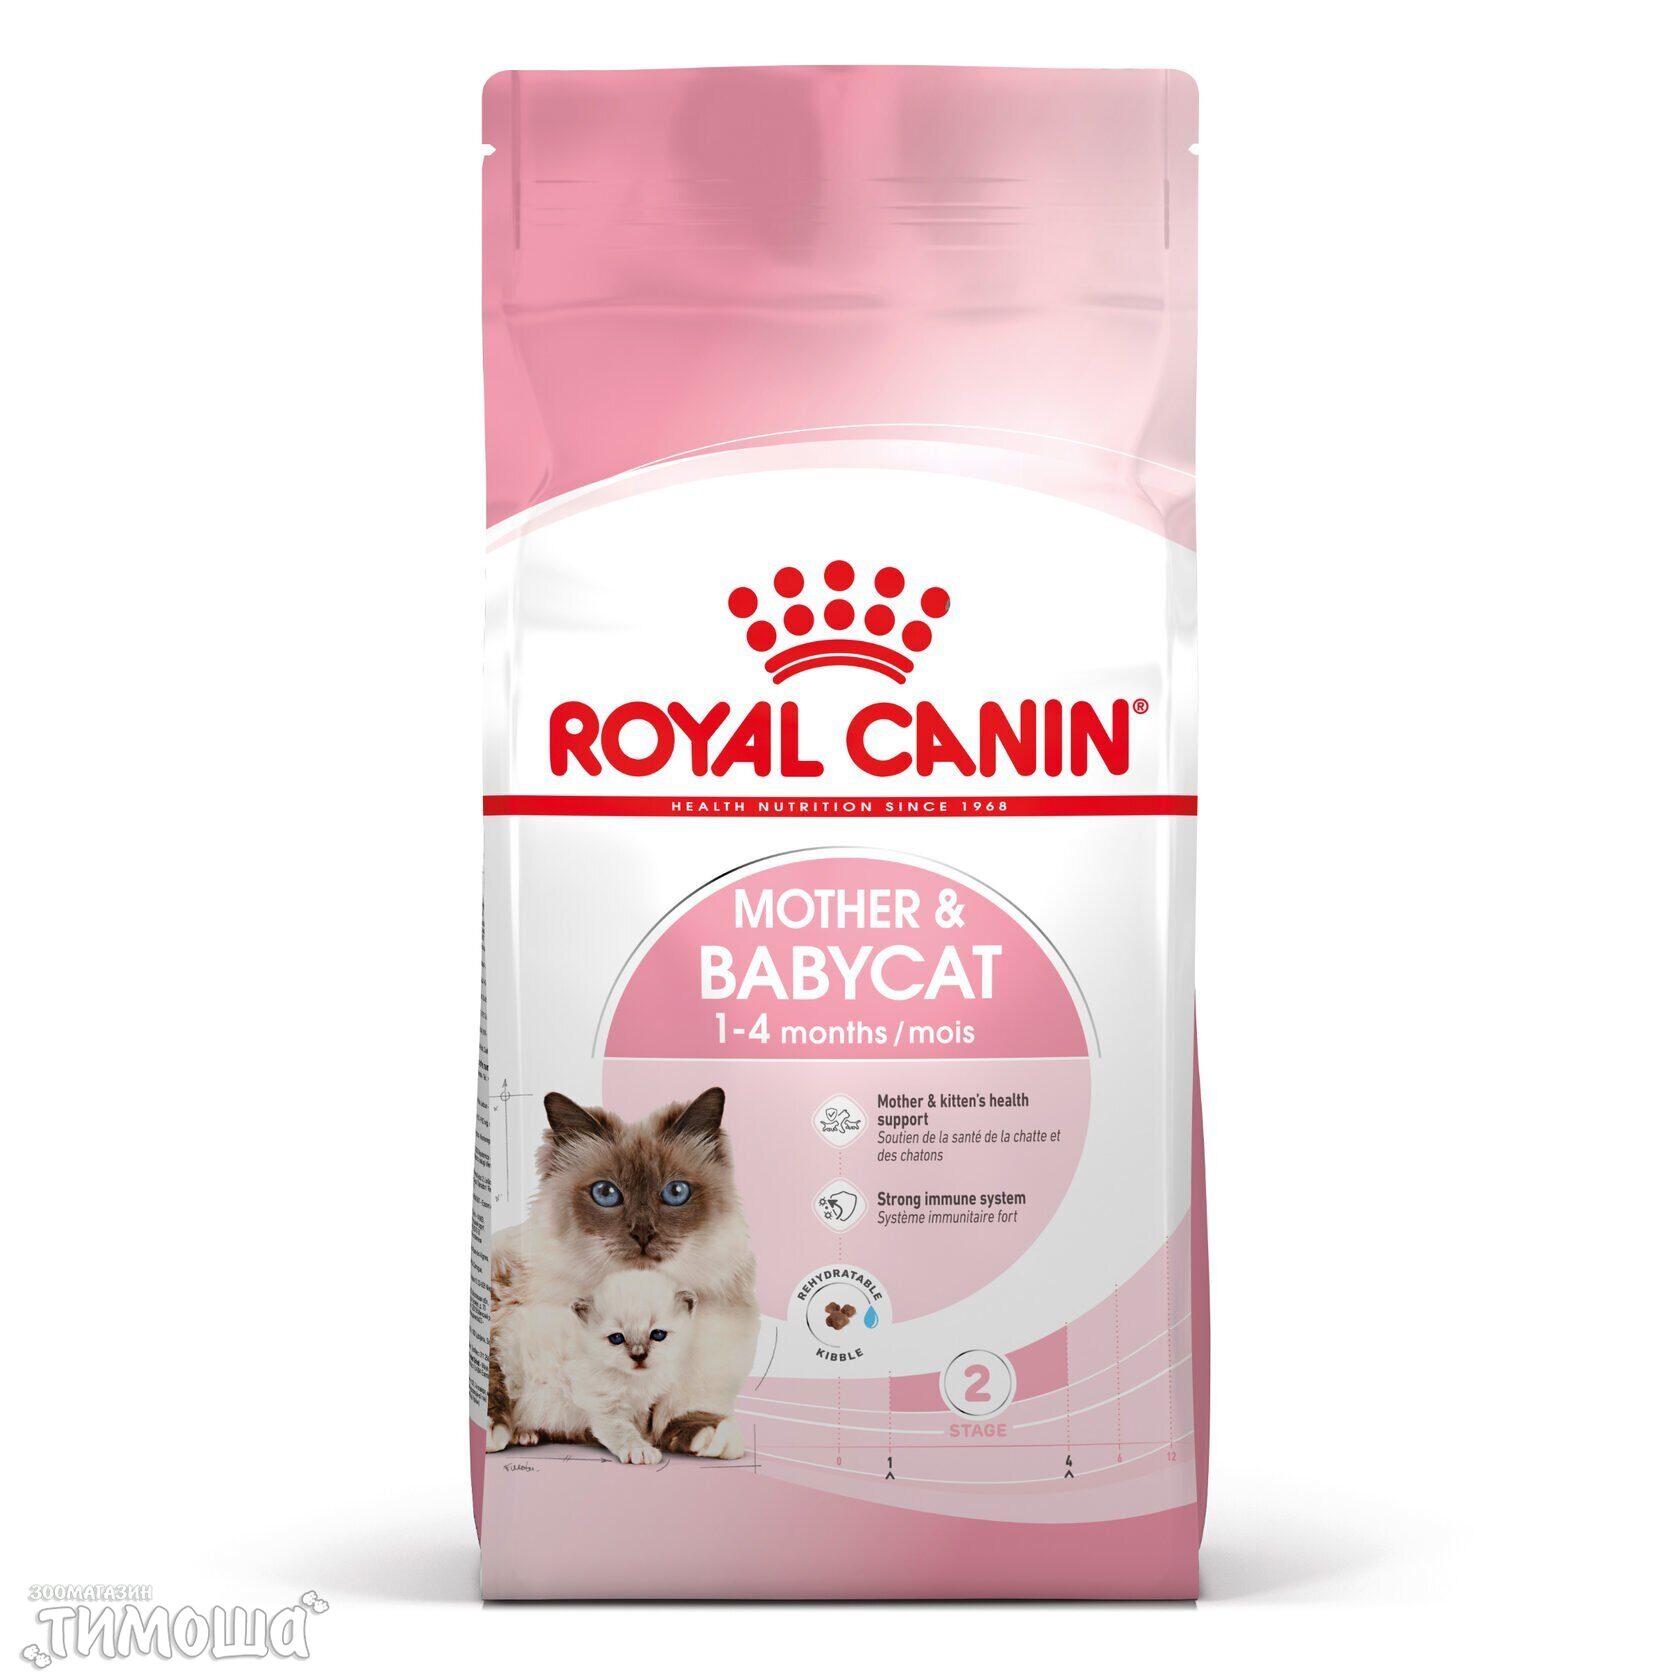 Royal Canin Mother and Babycat, упаковка 2 кг